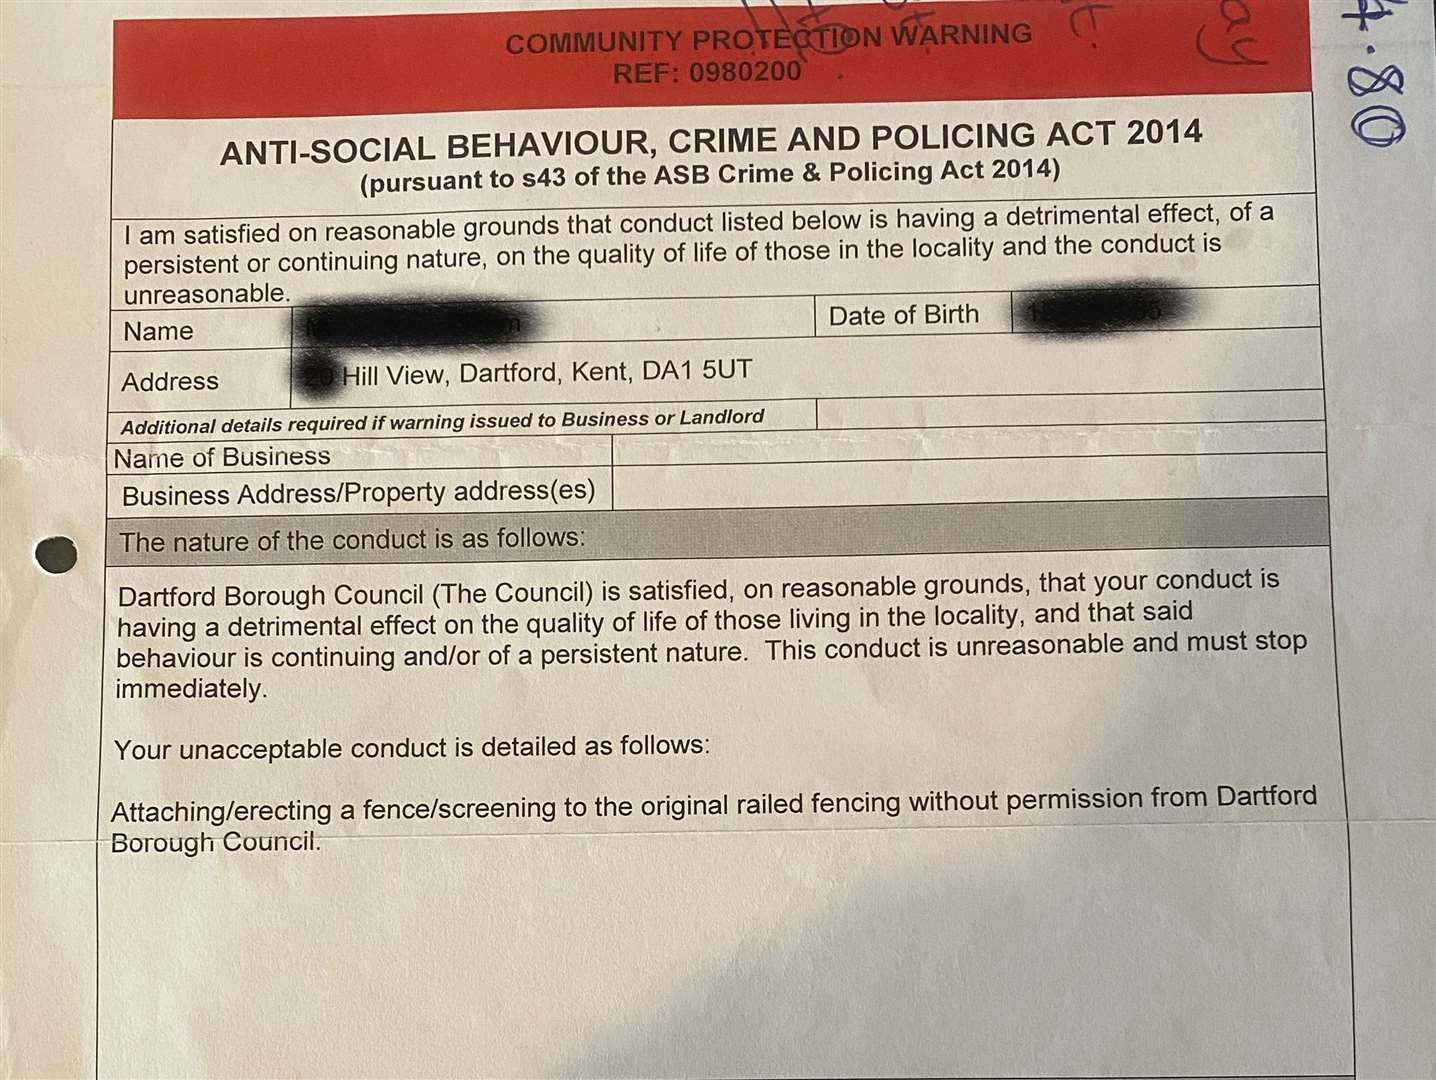 Some neighbours have been issued community protection warnings for anti-social behaviour